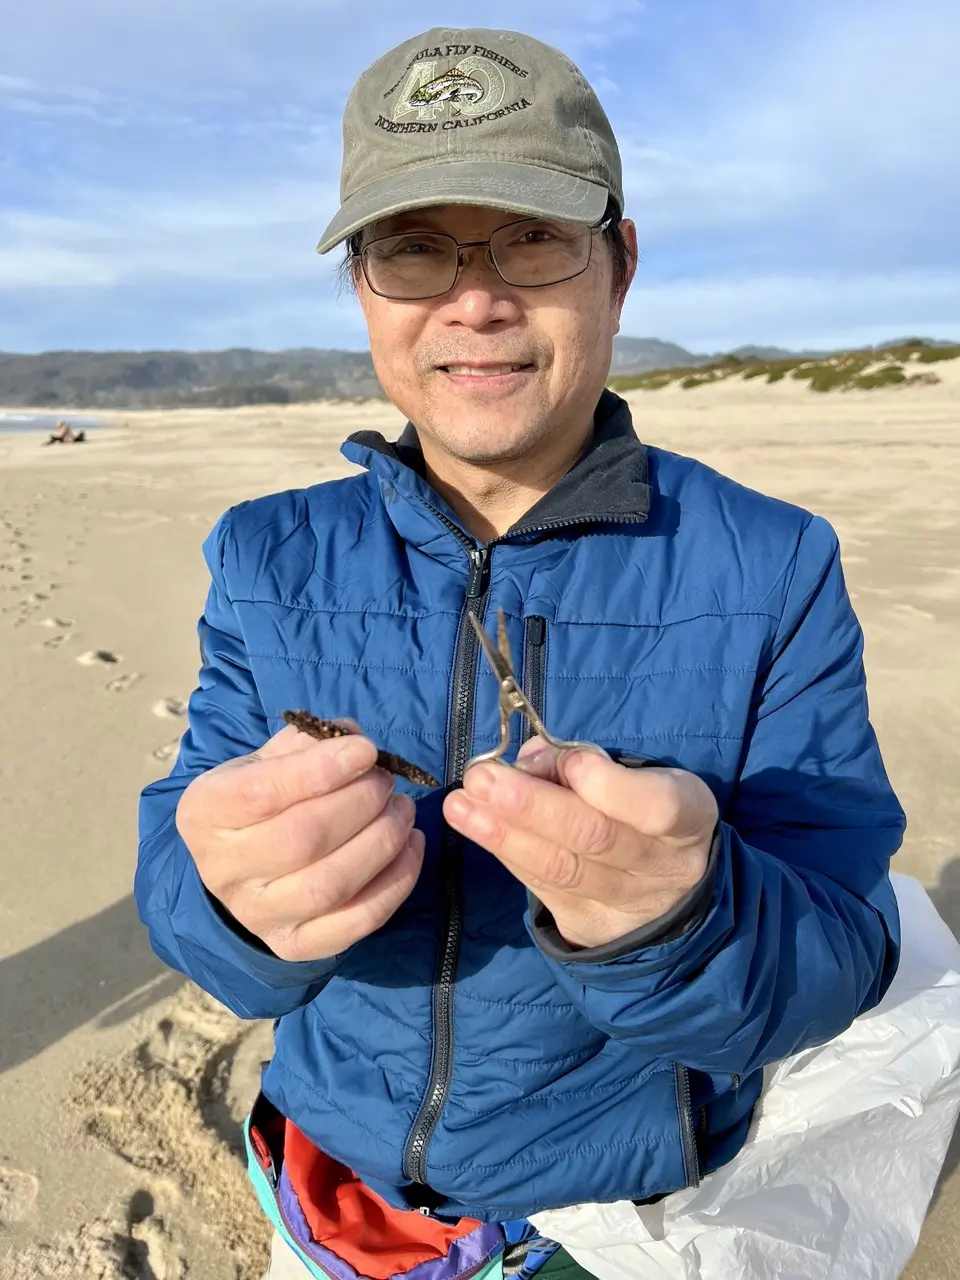 Metal detecting lesson student holds up items found while searching the beach